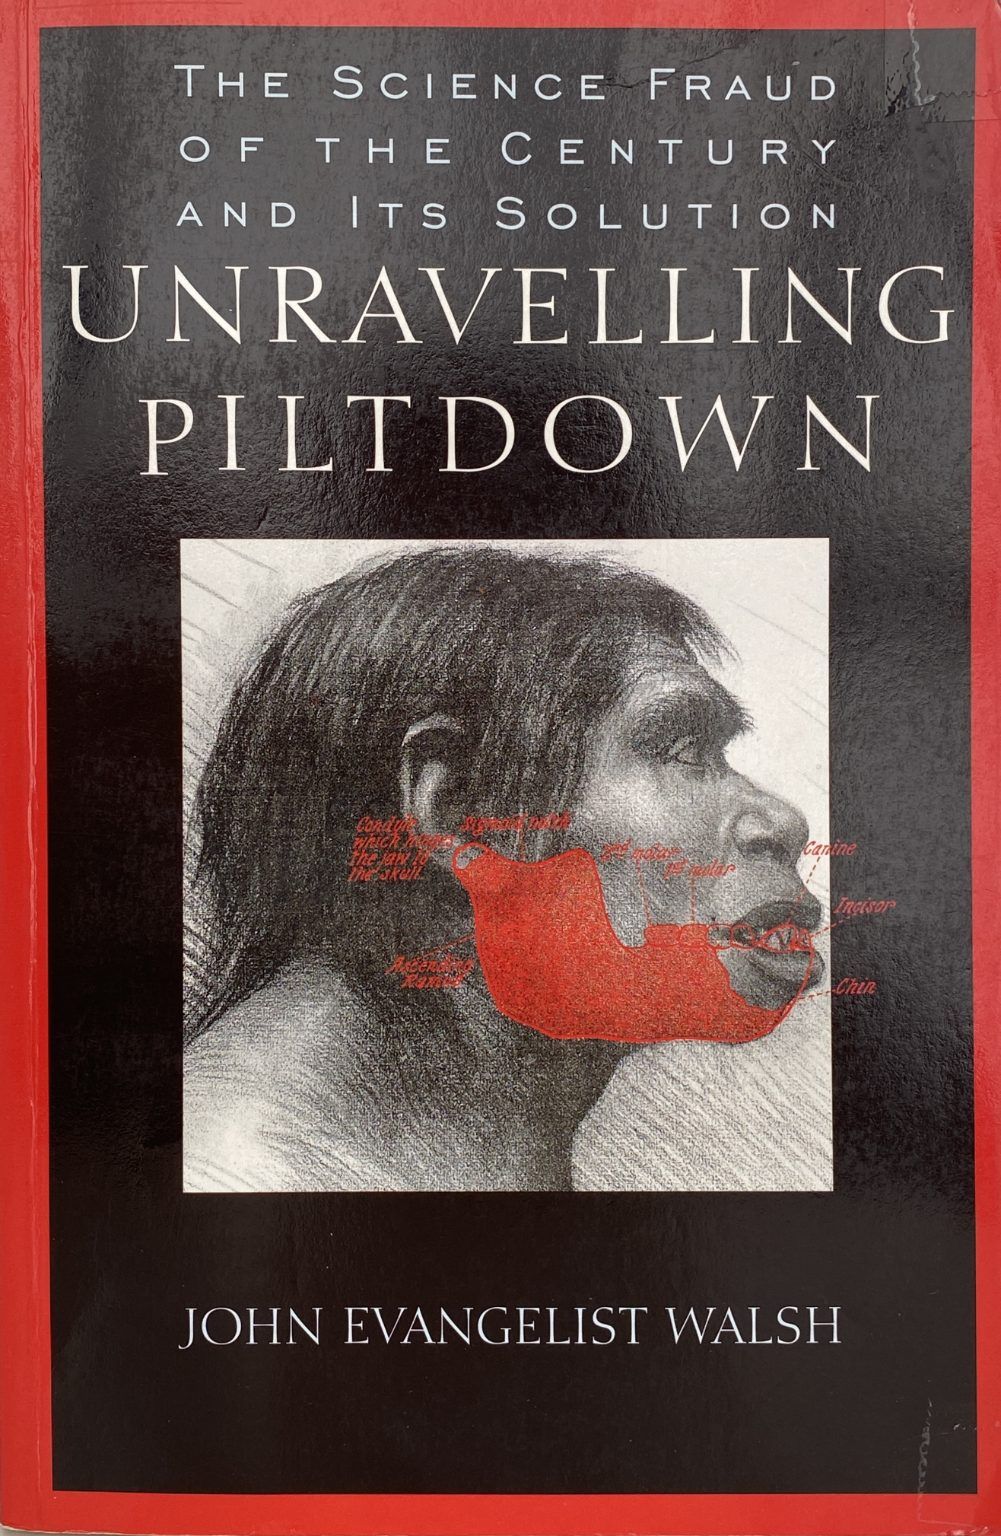 UNRAVELLING PILTDOWN: The science fraud of the Century and its Solution